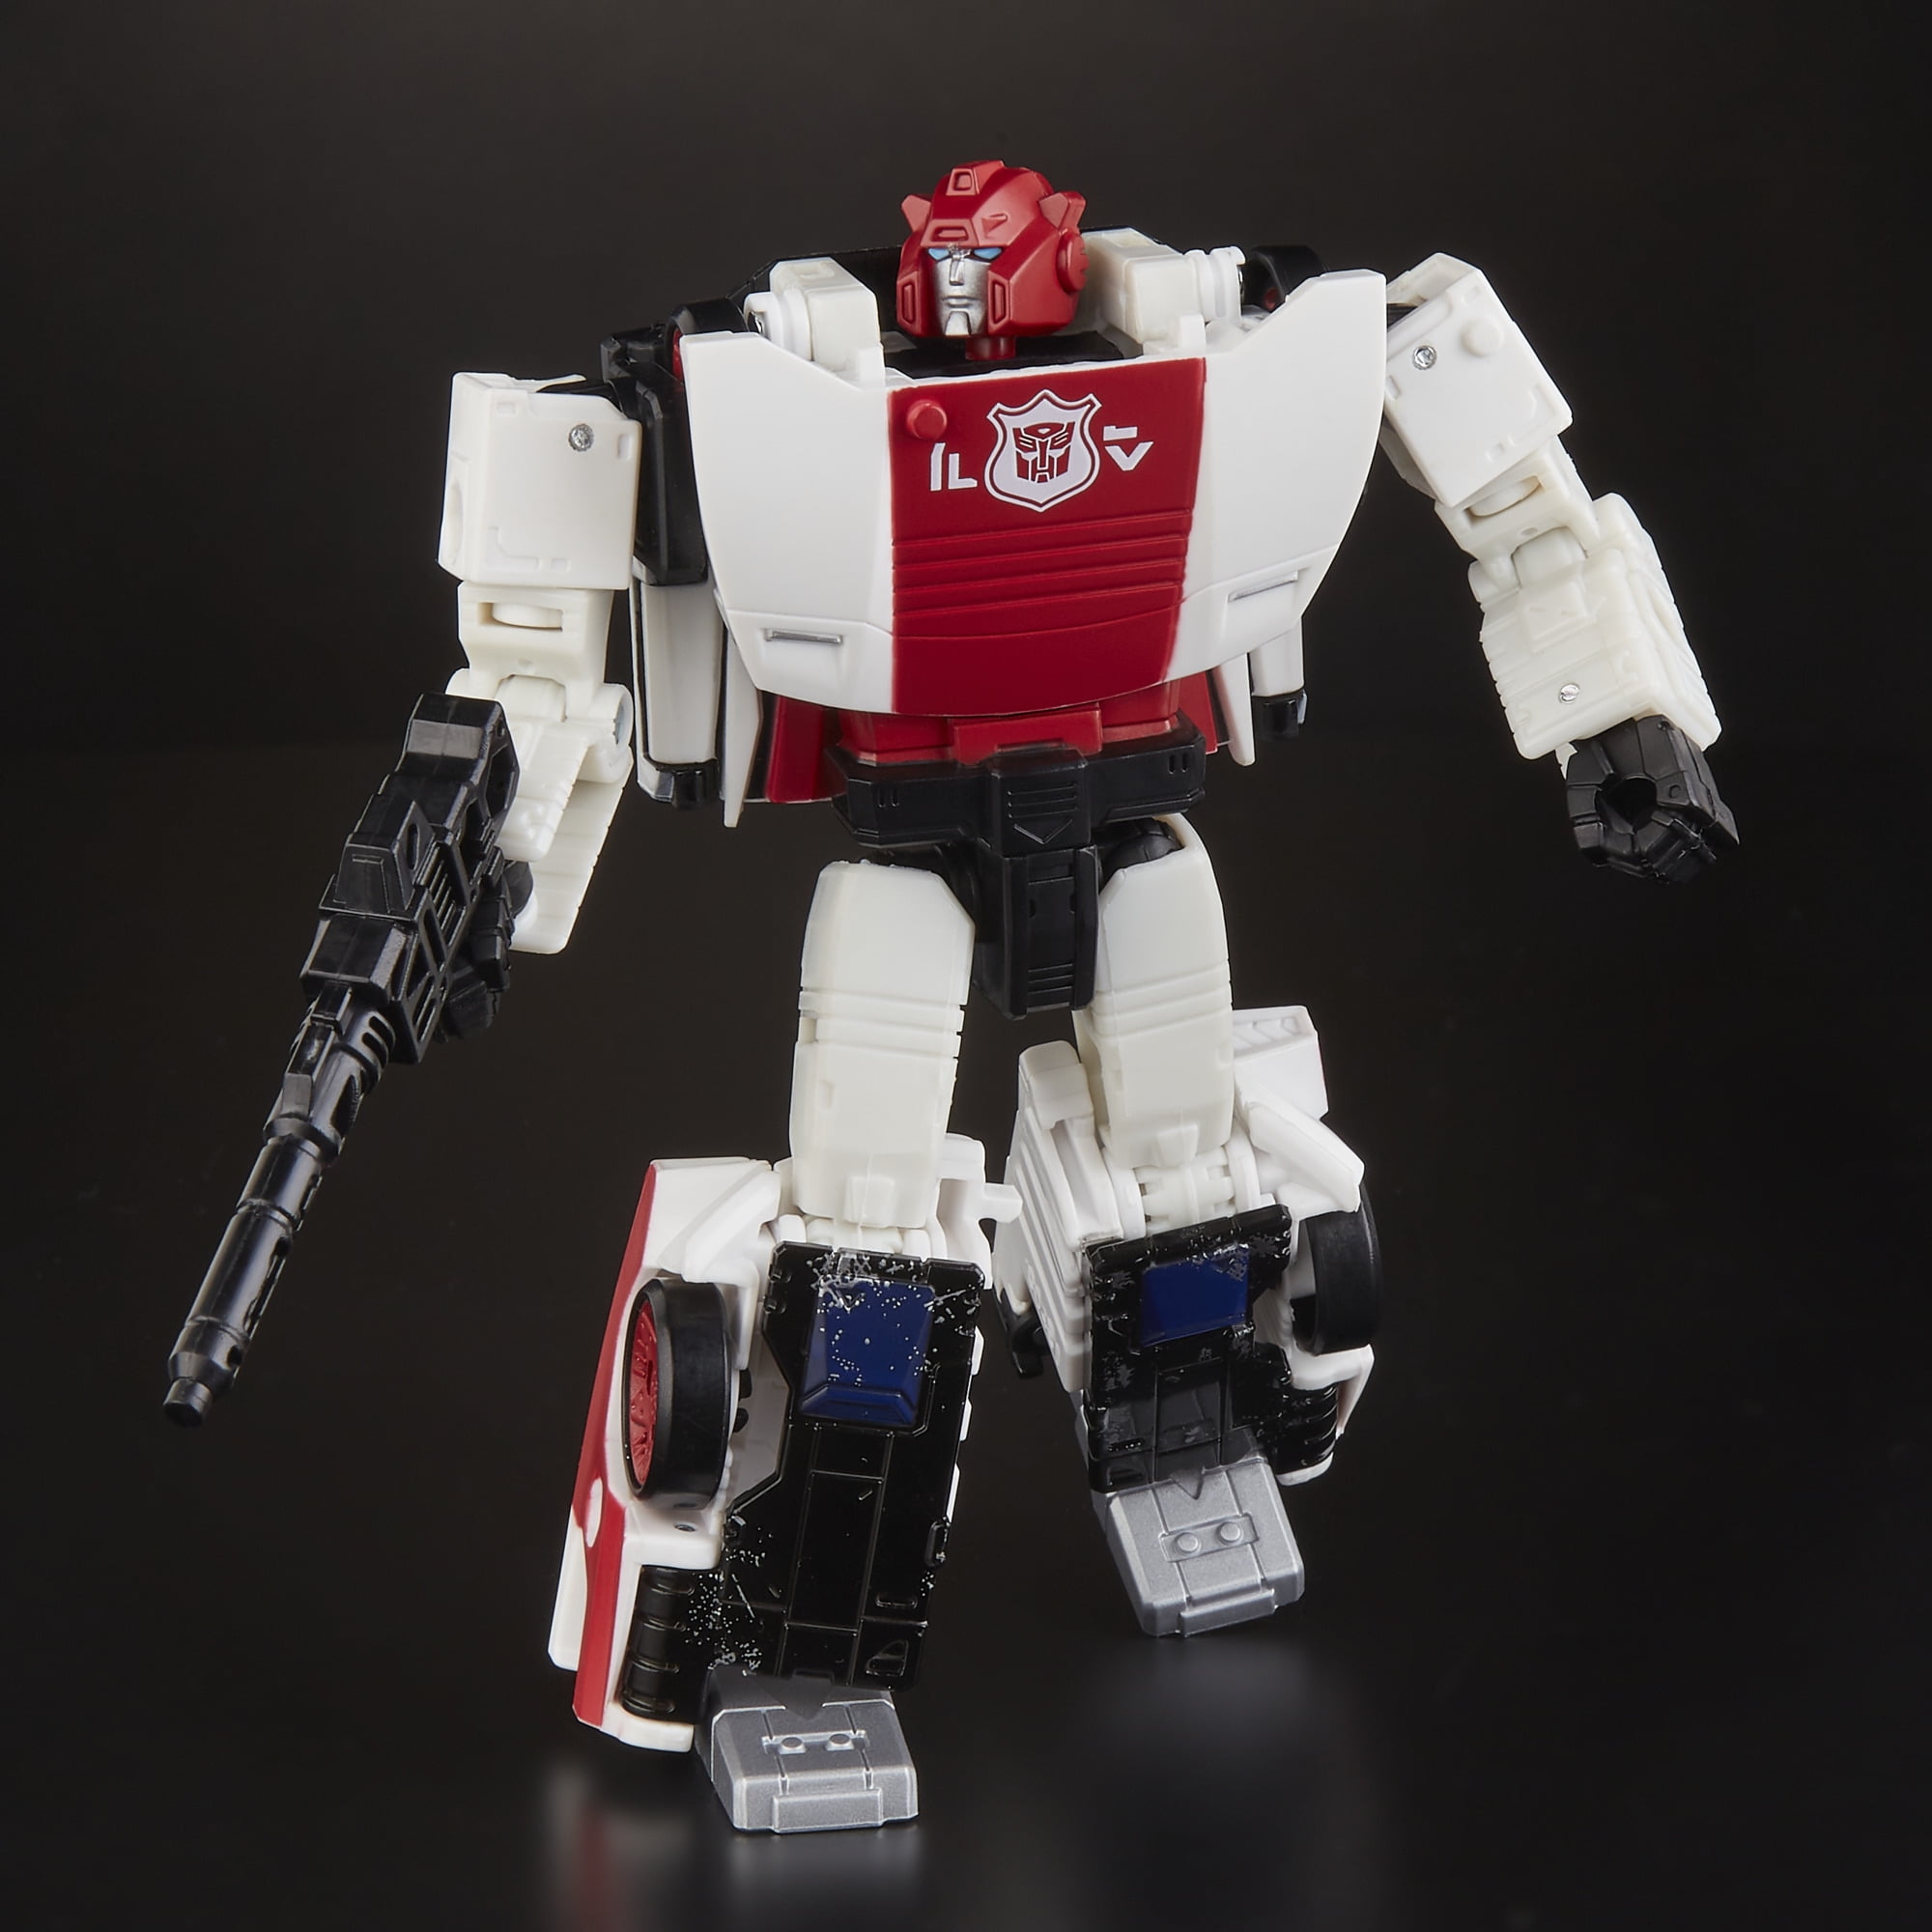 Siege Chapter for sale online Hasbro Transformers Generations War for Cybertron Deluxe WFC-S35 Red Alert Action Figure 